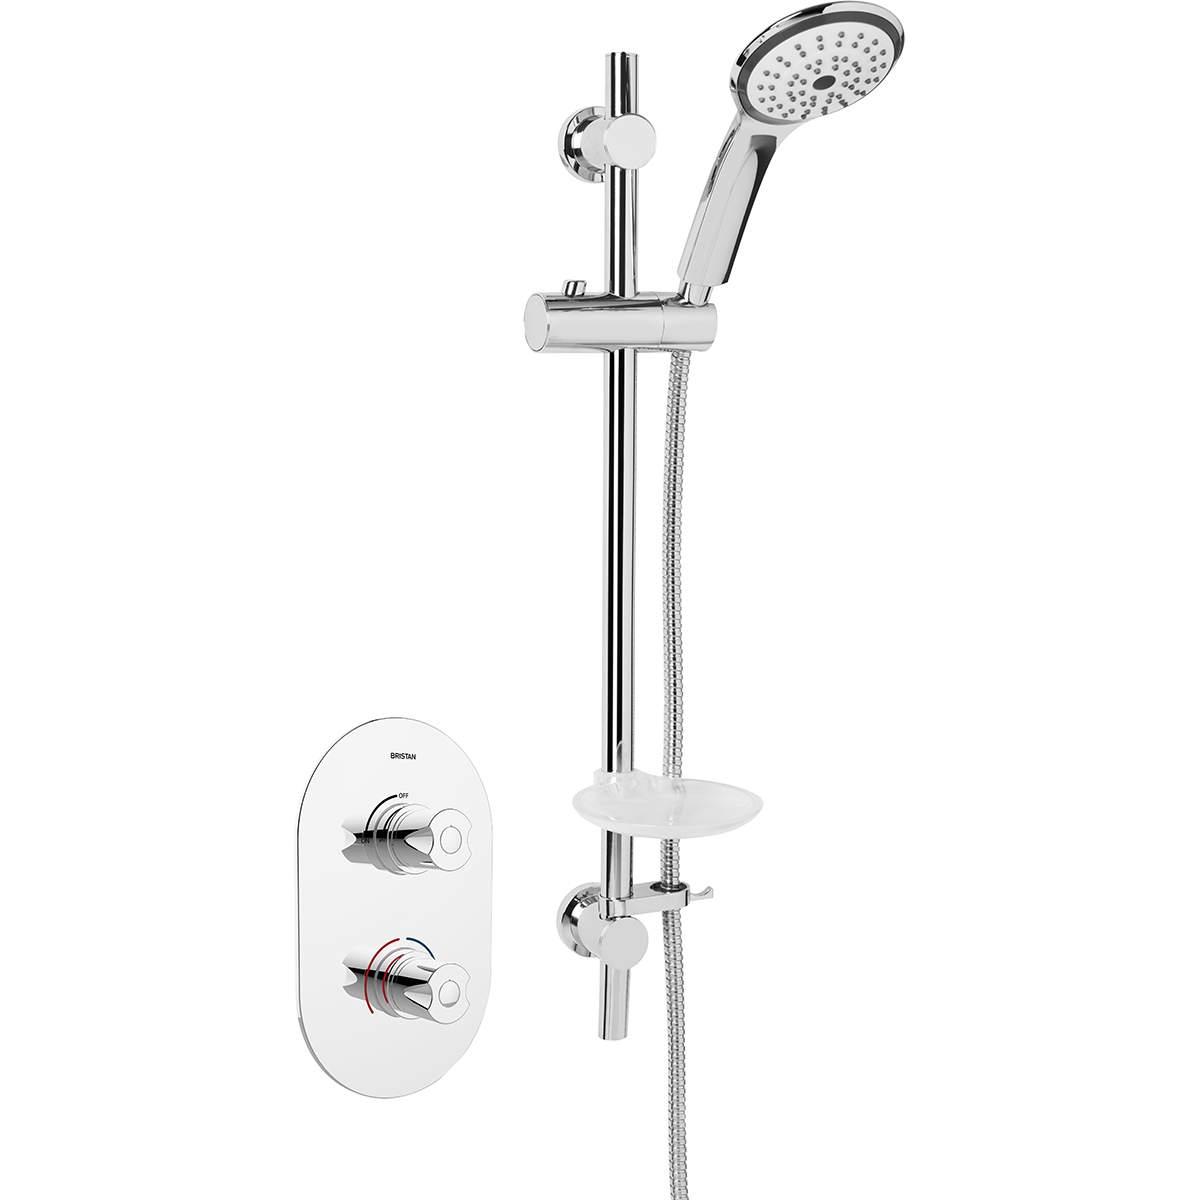 Bristan Artisan Thermostatic Recessed Concealed Dual Control Shower Valve with Adjustable Riser (AR3 SHCMT C)